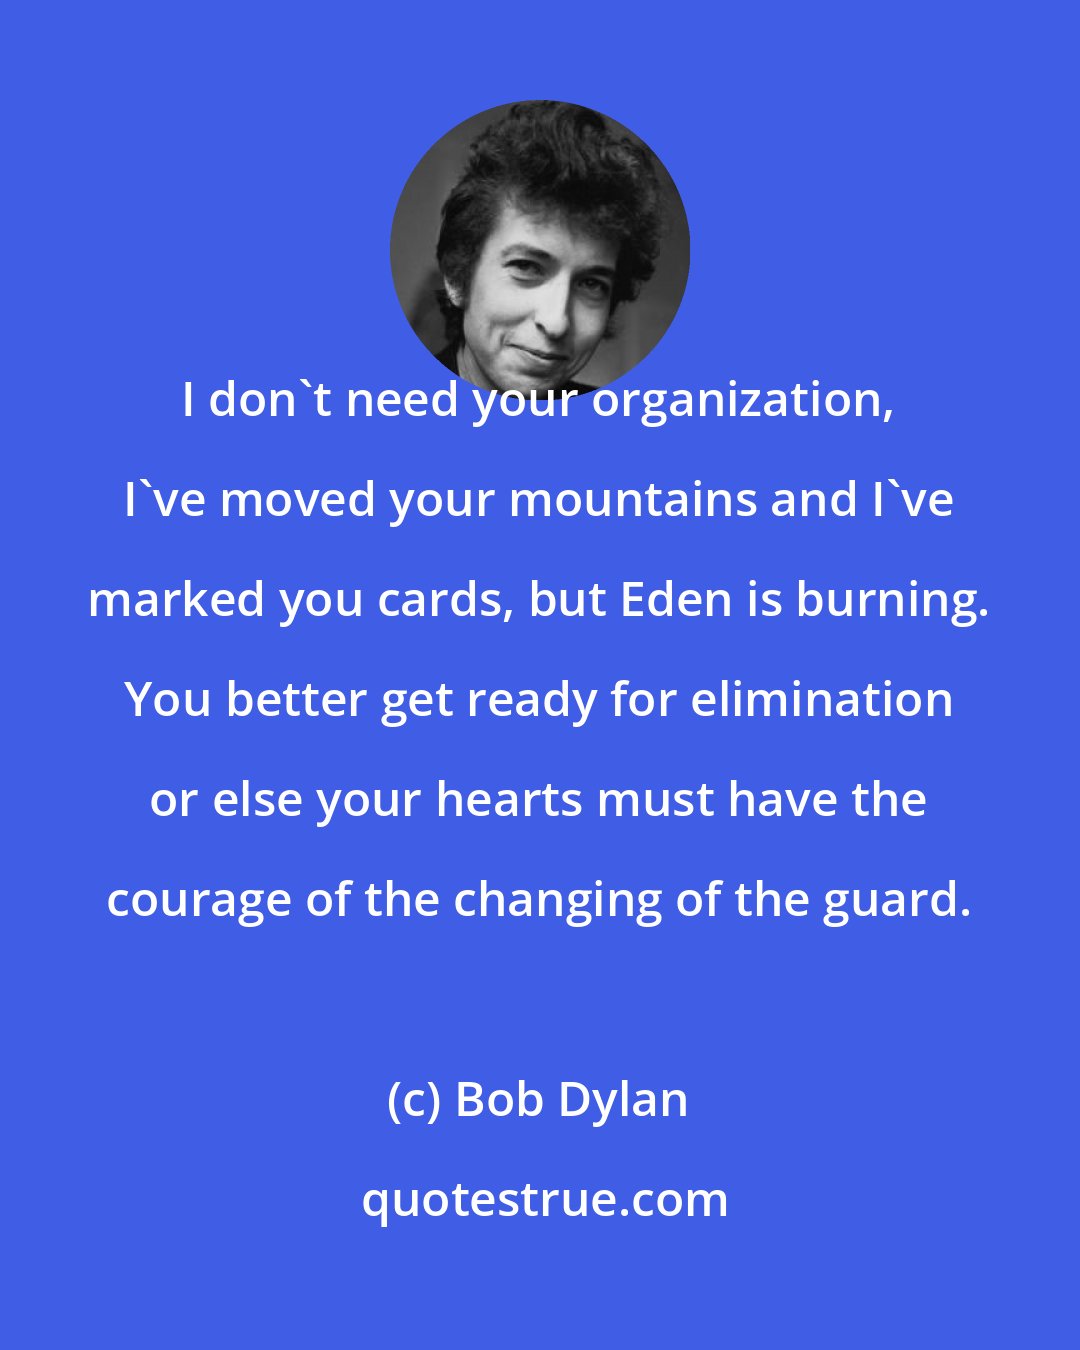 Bob Dylan: I don't need your organization, I've moved your mountains and I've marked you cards, but Eden is burning. You better get ready for elimination or else your hearts must have the courage of the changing of the guard.